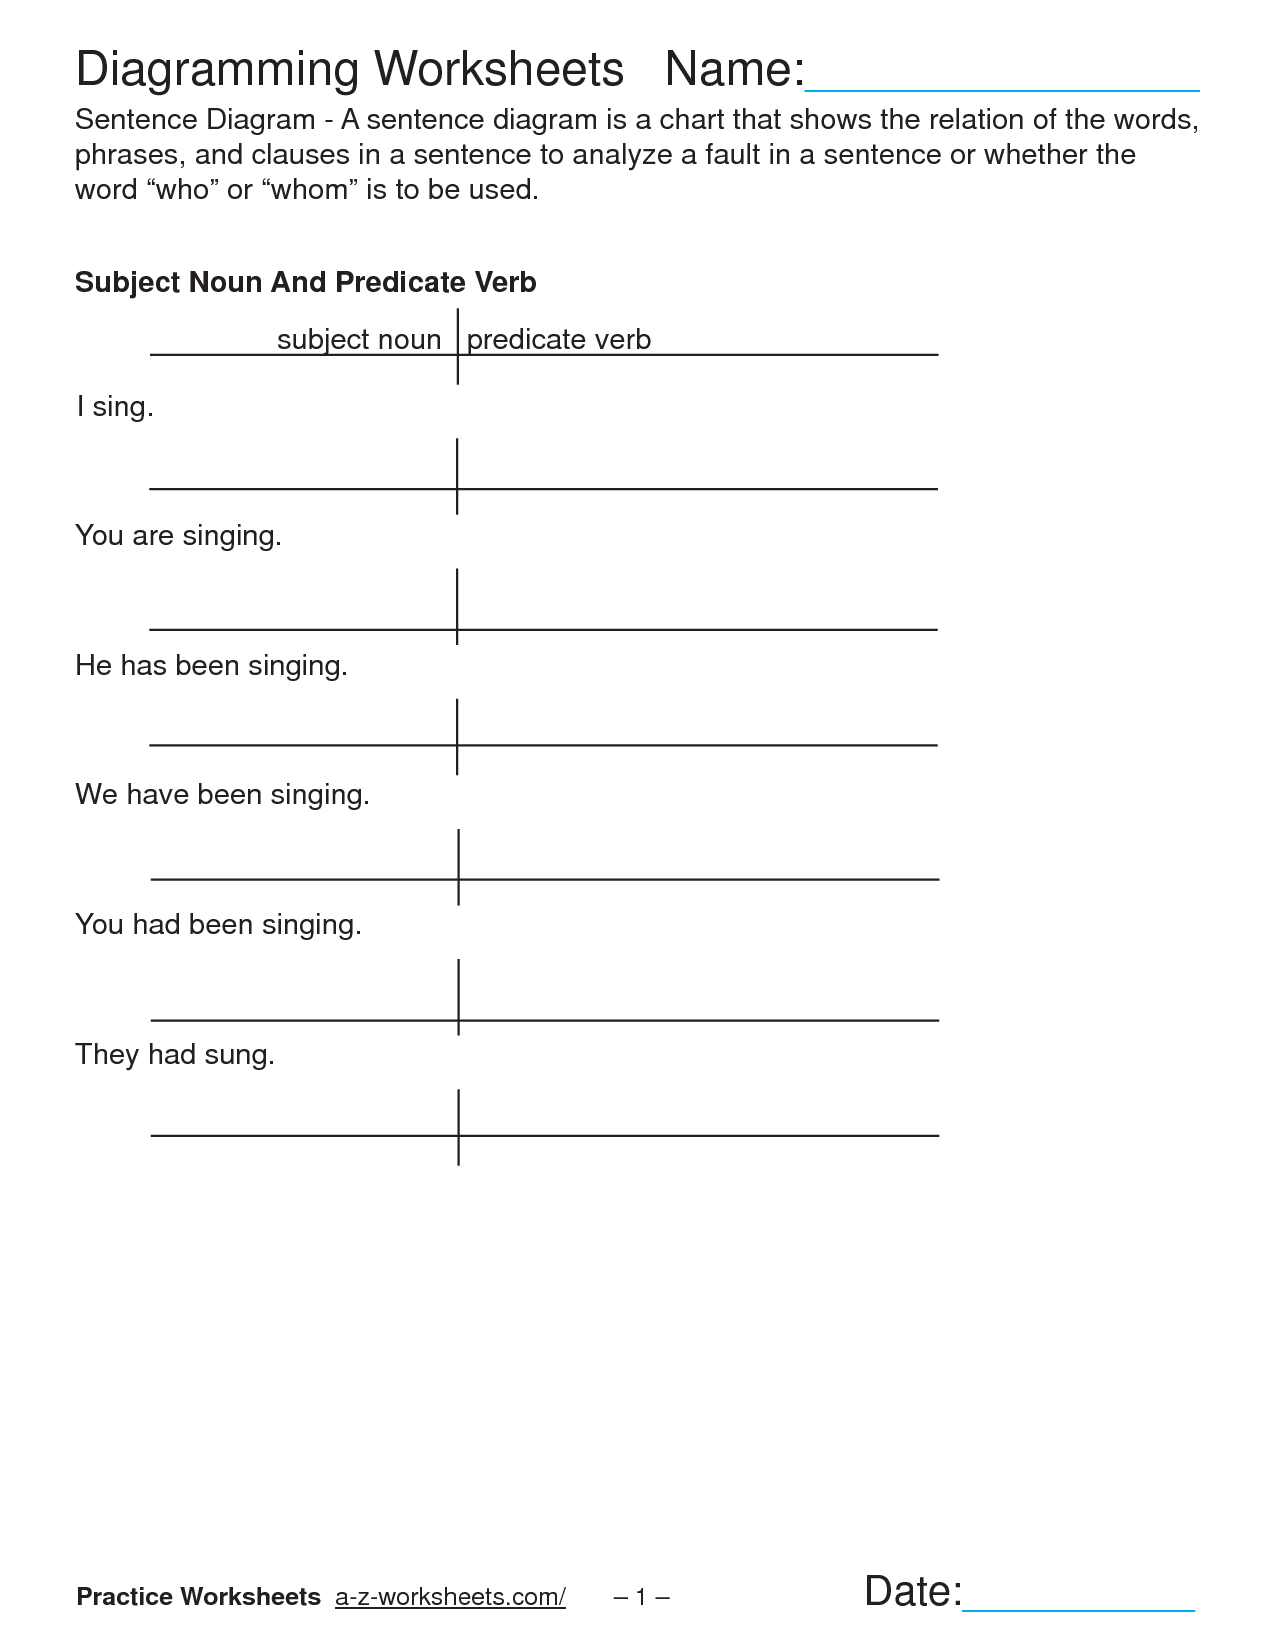 How To Diagram A Sentence Worksheet New Free Printable Sentence - Free Printable Sentence Diagramming Worksheets